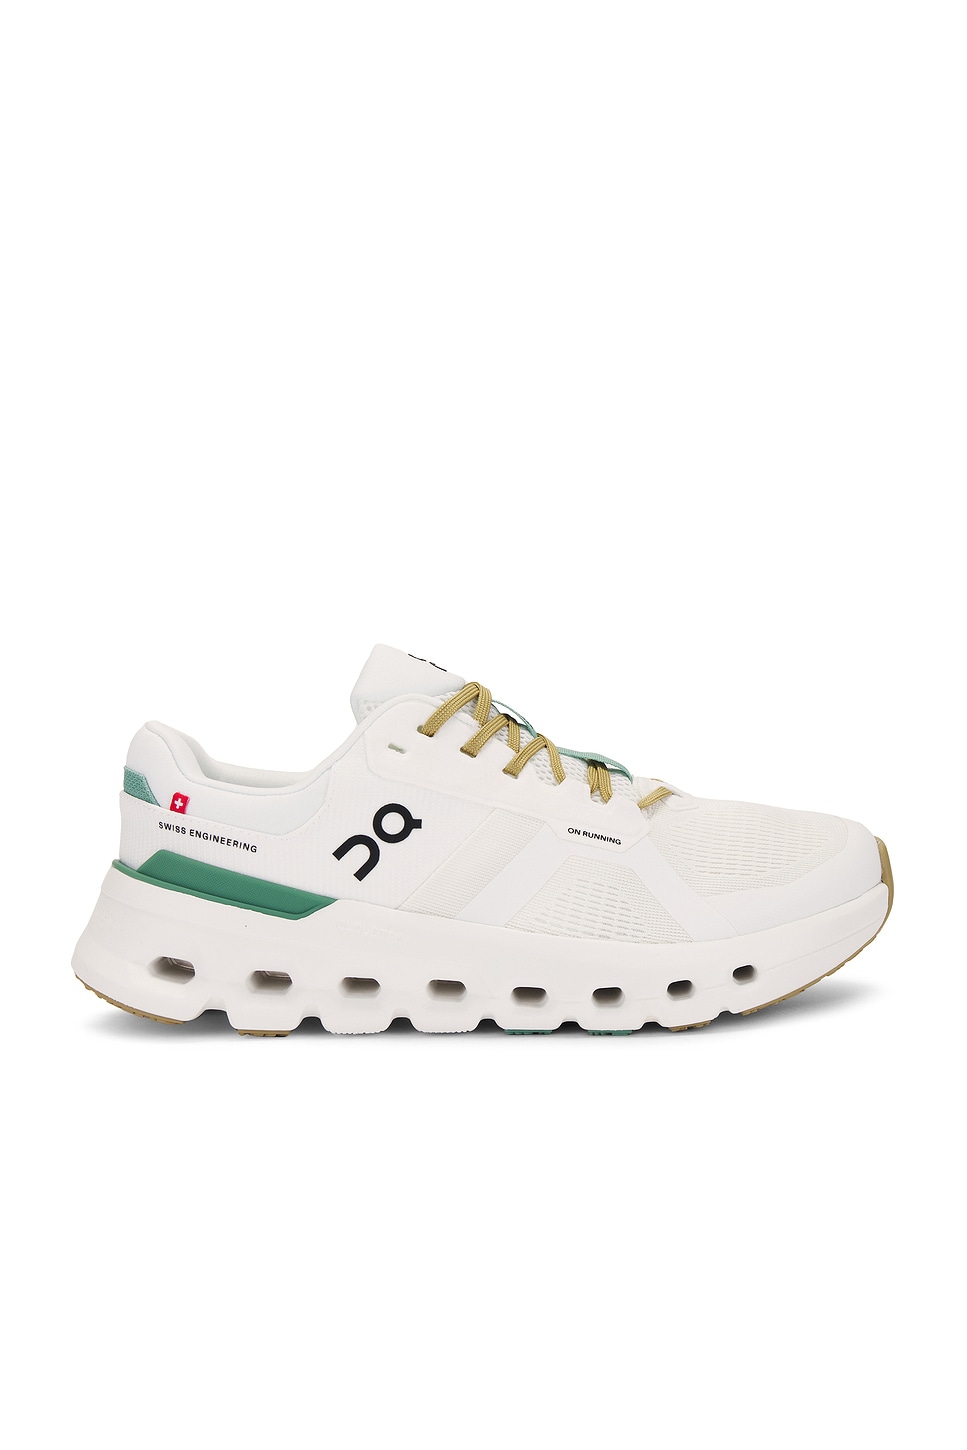 Image 1 of On Cloudrunner 2 Sneaker in Undyed & Green